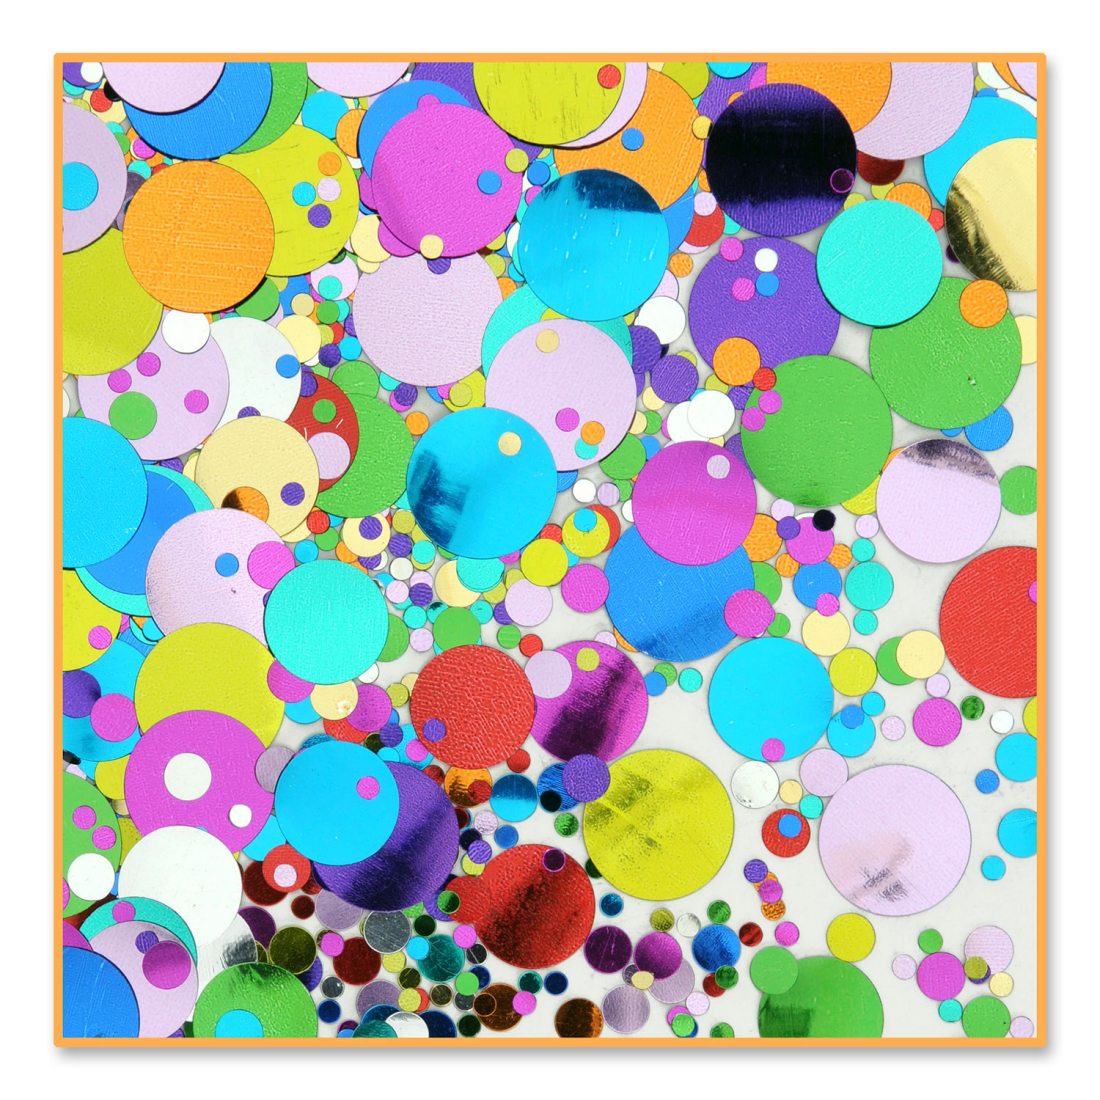 Beistle Pack of 6 Multicolor Party Polka-dots Confetti Bags 0.5 oz. - image 1 of 1